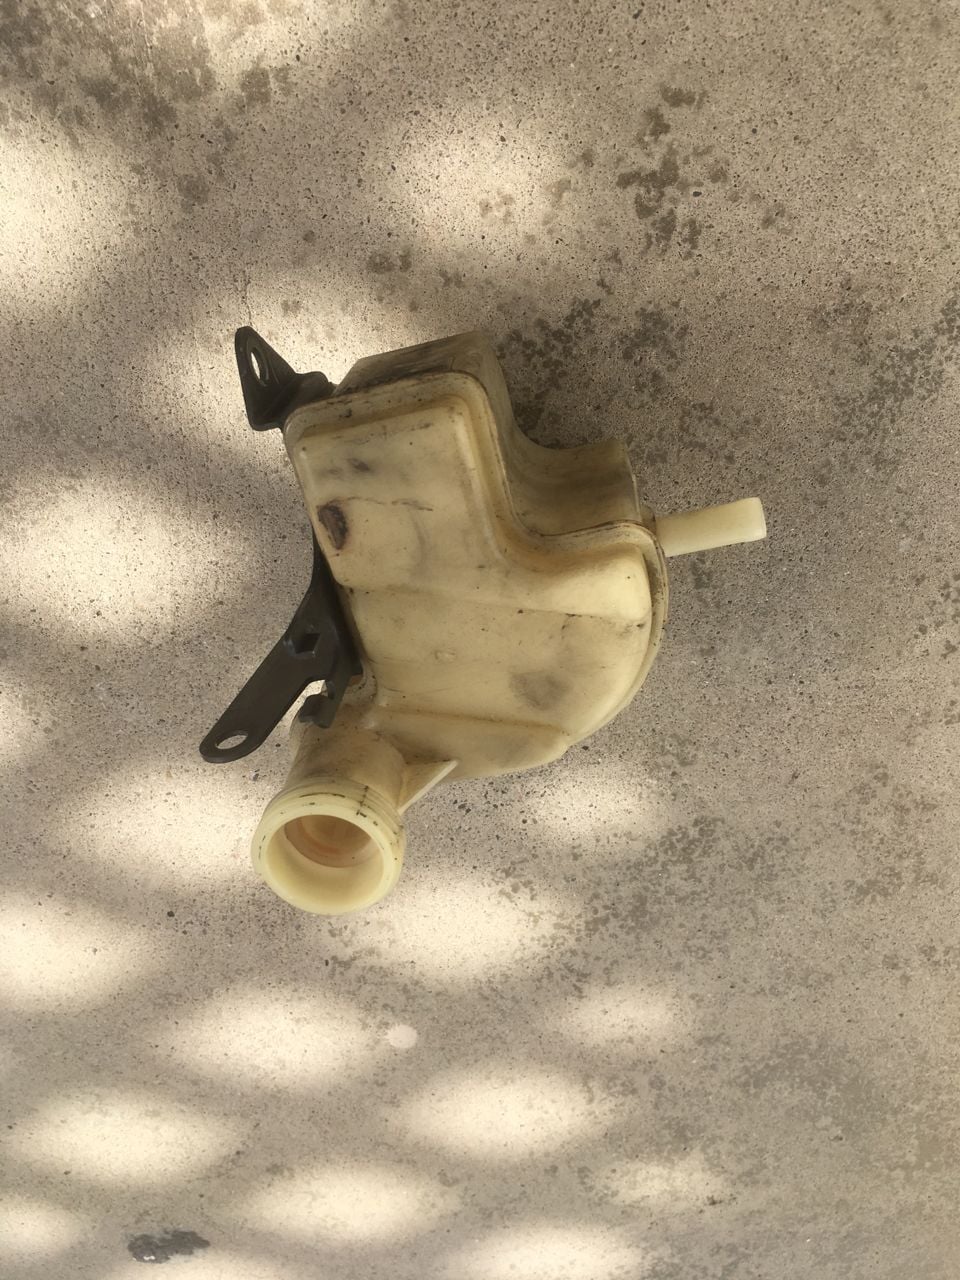 1993 Mazda RX-7 - power steering tank - Engine - Complete - $20 - Seal Beach, CA 90740, United States